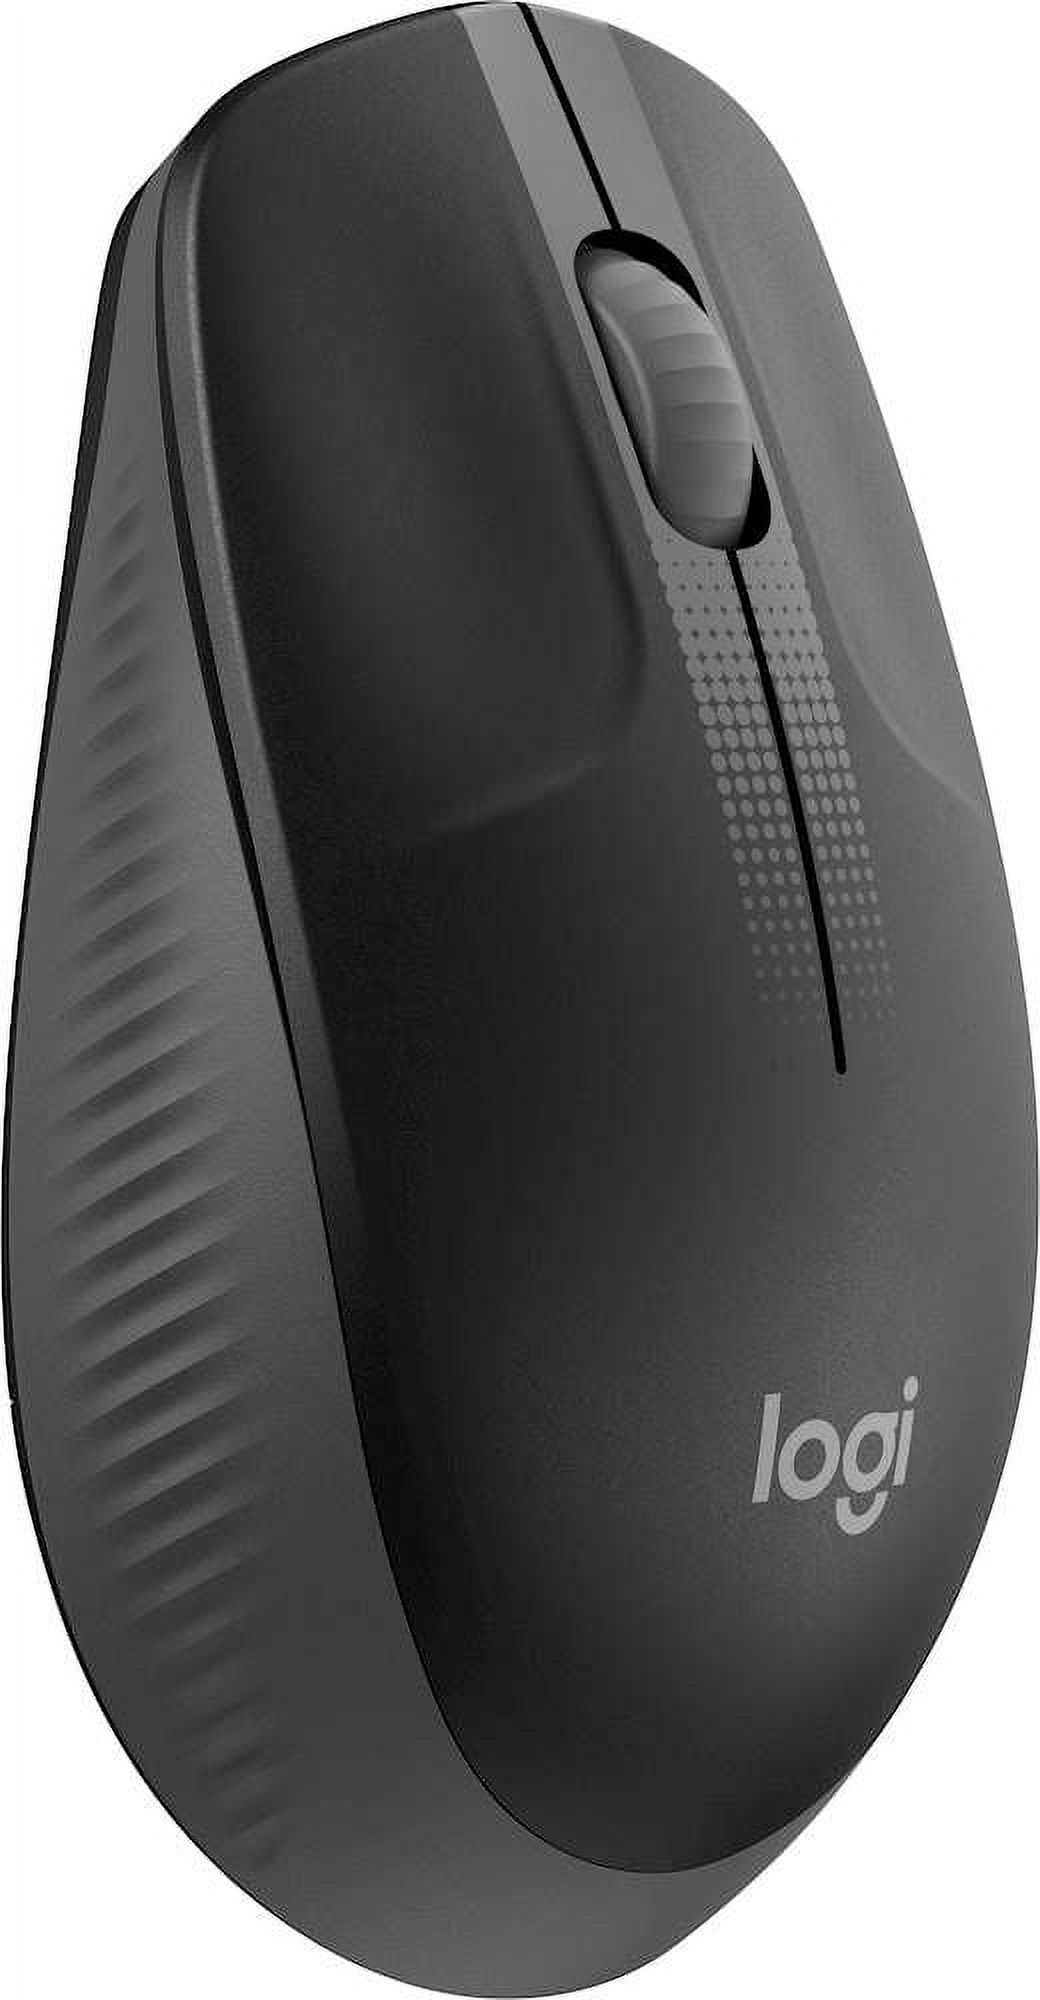 Logitech M190 Full-Sized Wireless Mouse, Charcoal - image 2 of 4